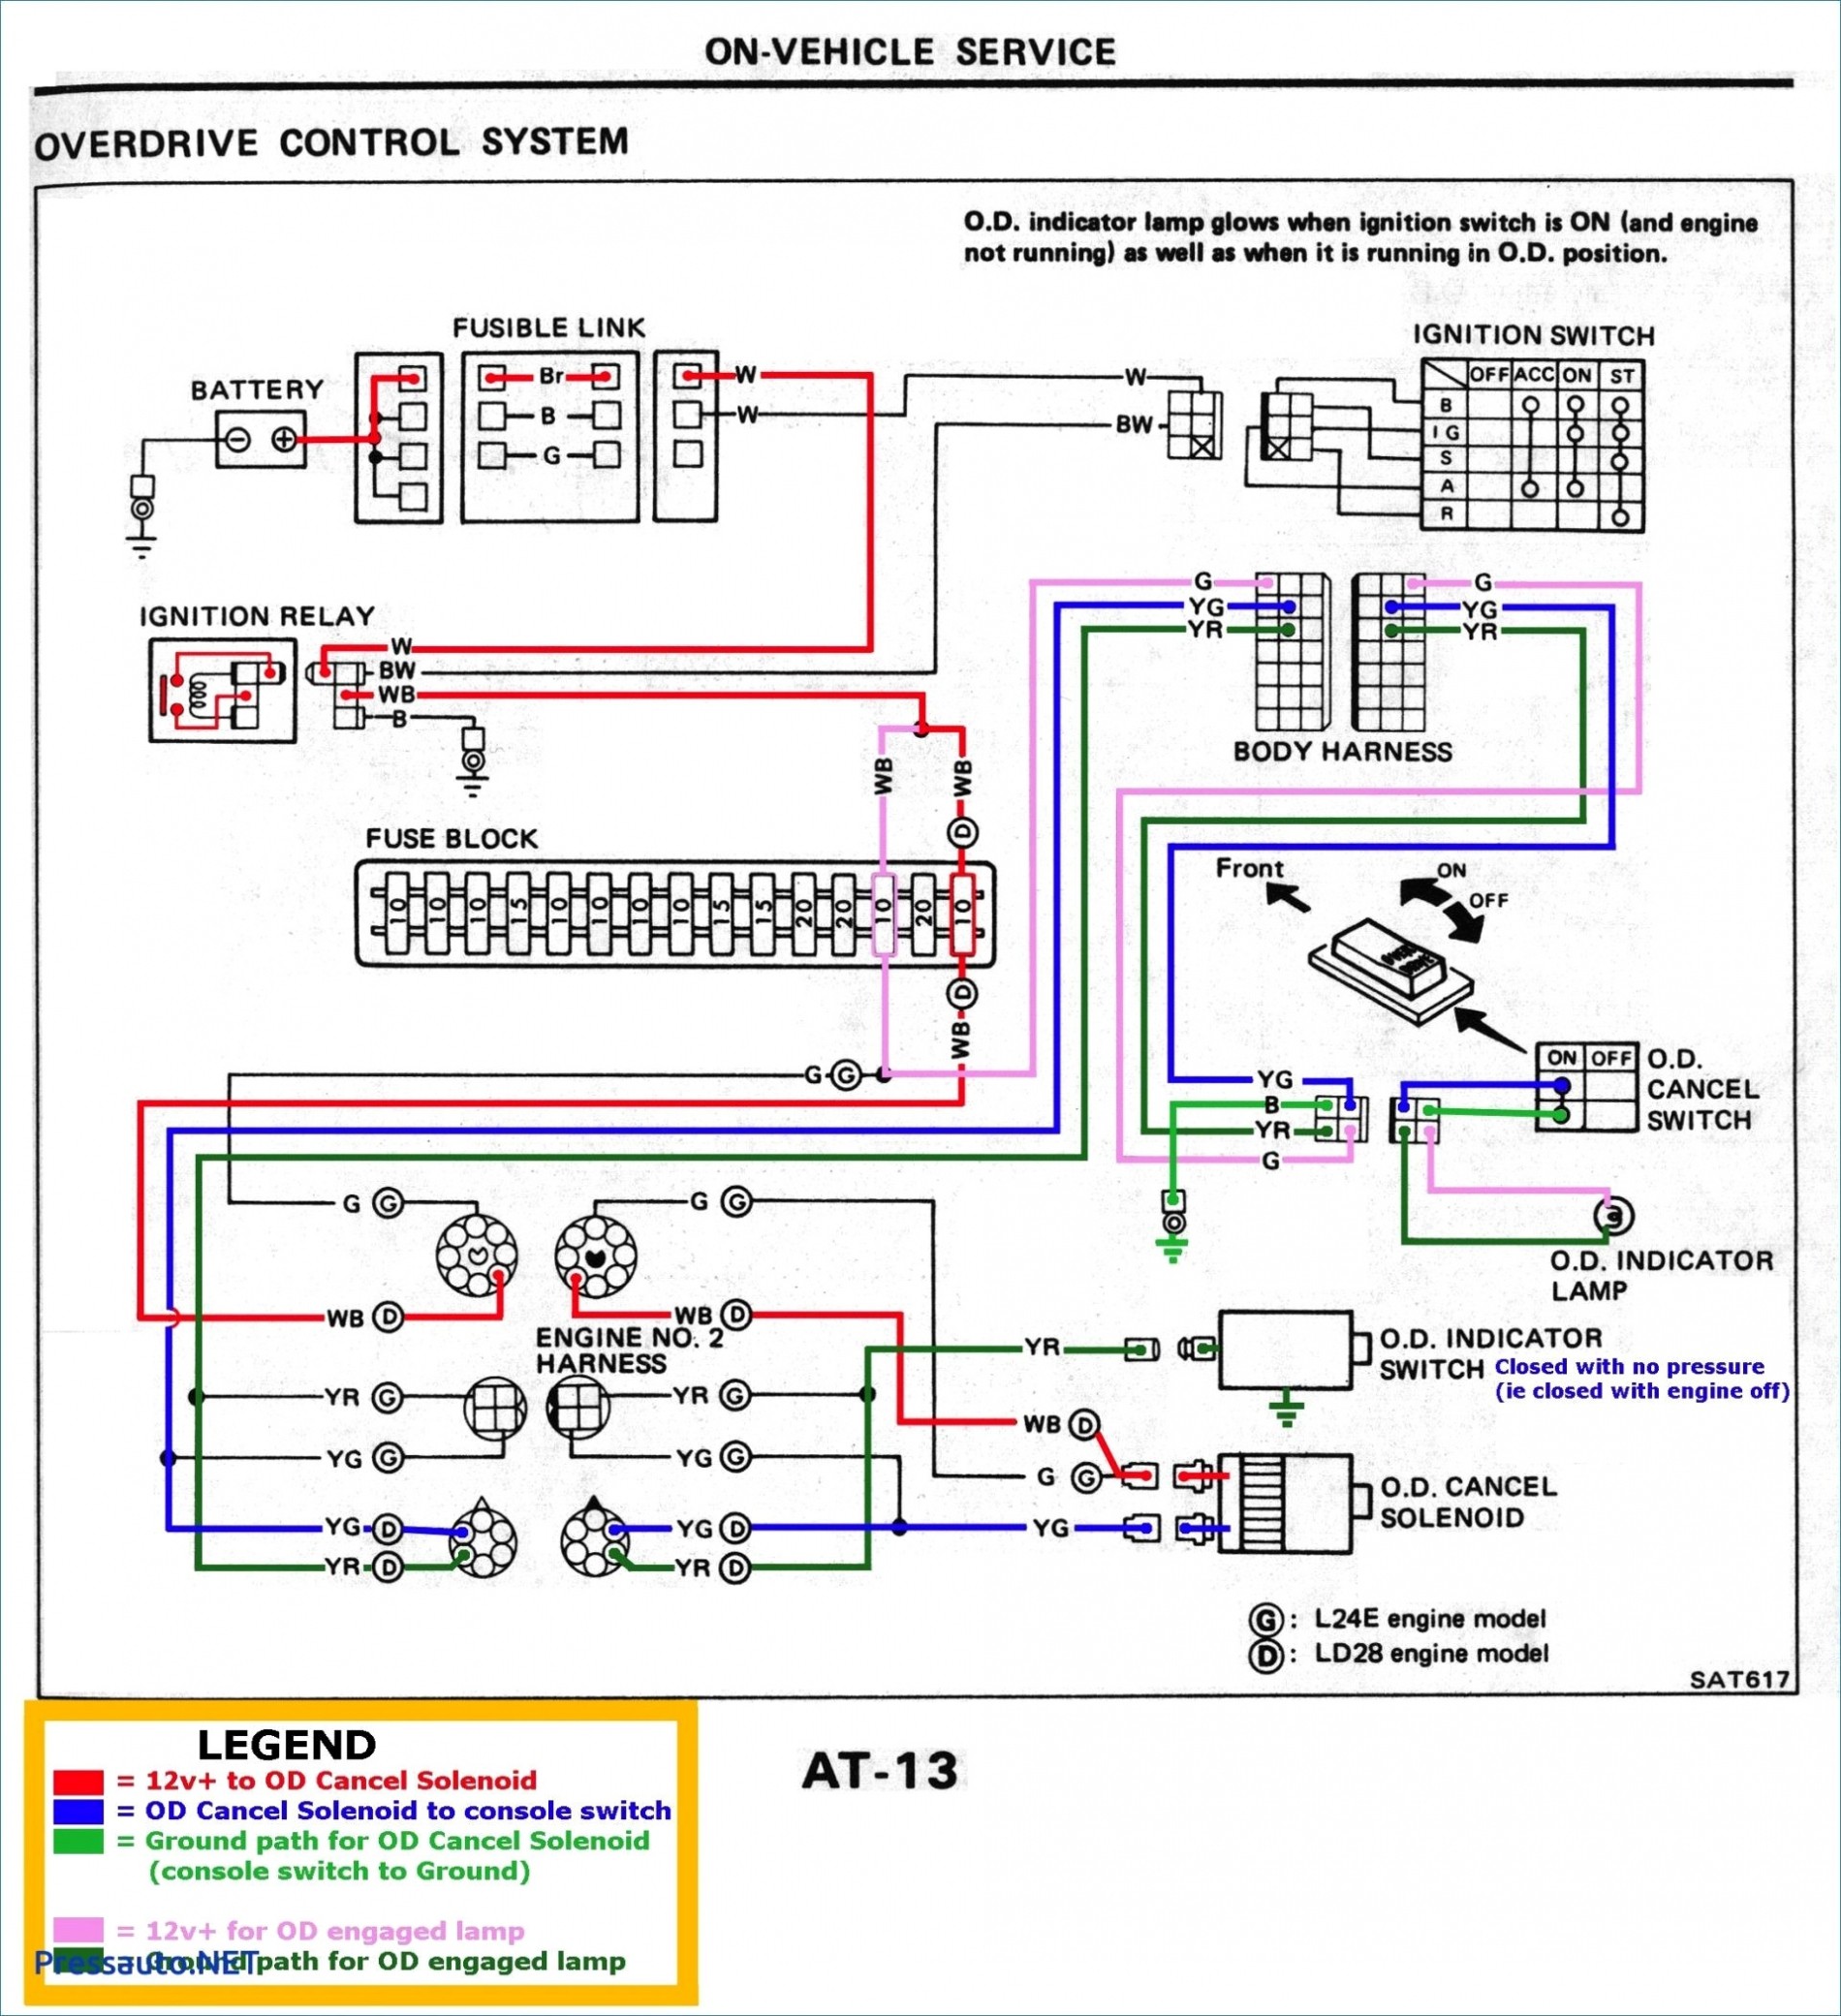 2000 Chevy S10 Engine Diagram Chevy S10 Parts Catalog – Chevy S10 Exhaust System Diagram